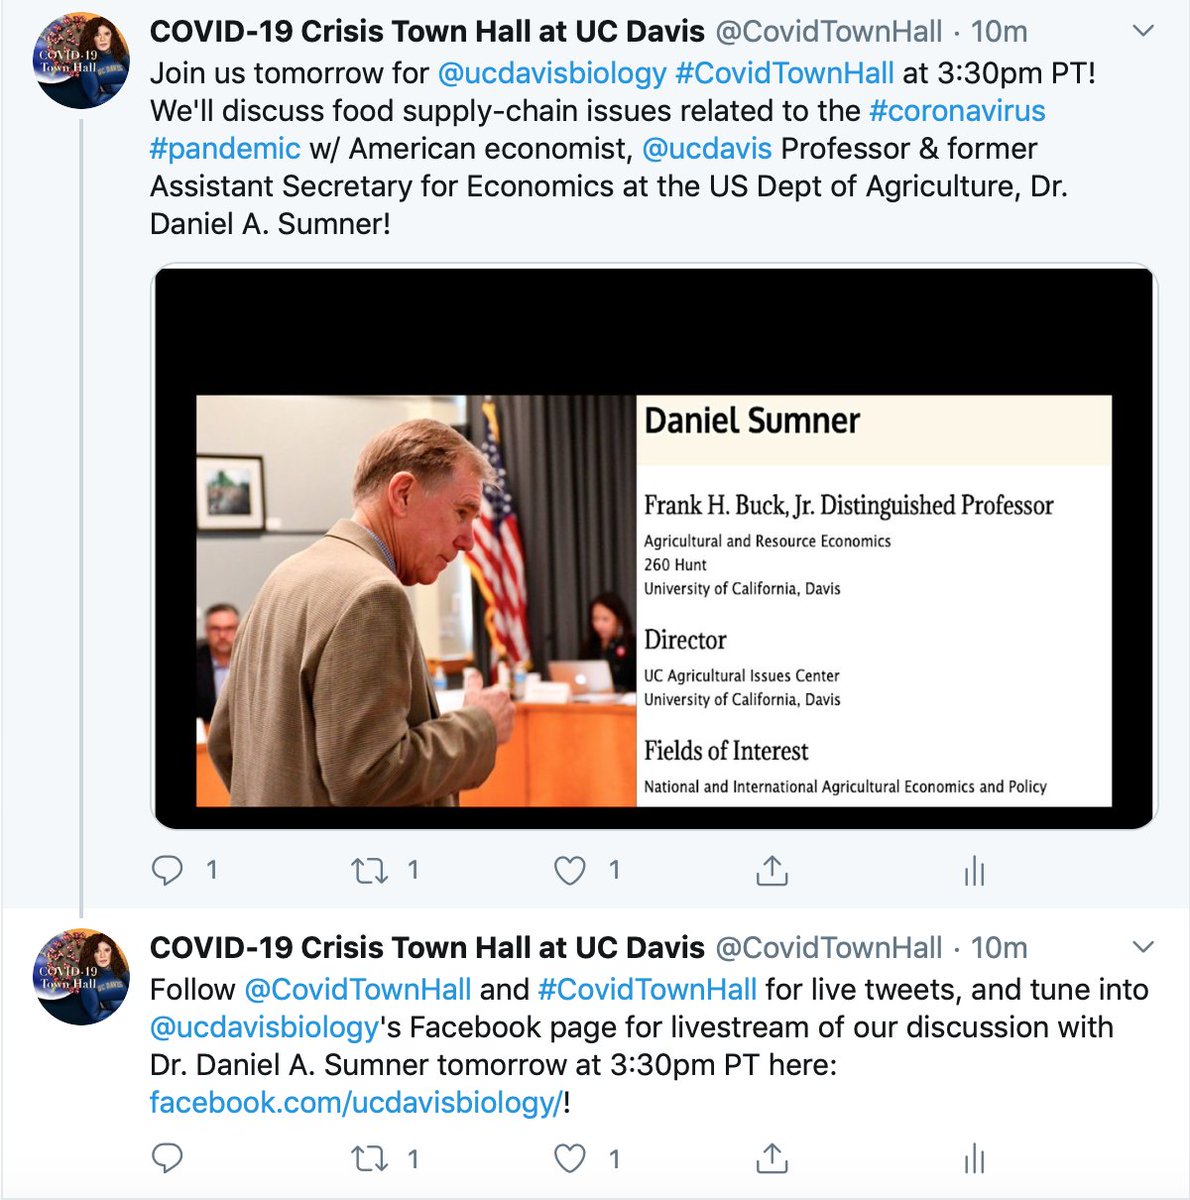 Starting soon at 3:30PT! American Economist Dr. Daniel A. Sumner will be speaking with  @ucdavis students about food supply-chain issues related to the coronavirus pandemic at  @ucdavisbiology's  @CovidTownHall. Live streaming:  https://www.facebook.com/ucdavisbiology/   #CovidTownHall  #Covid19 1/